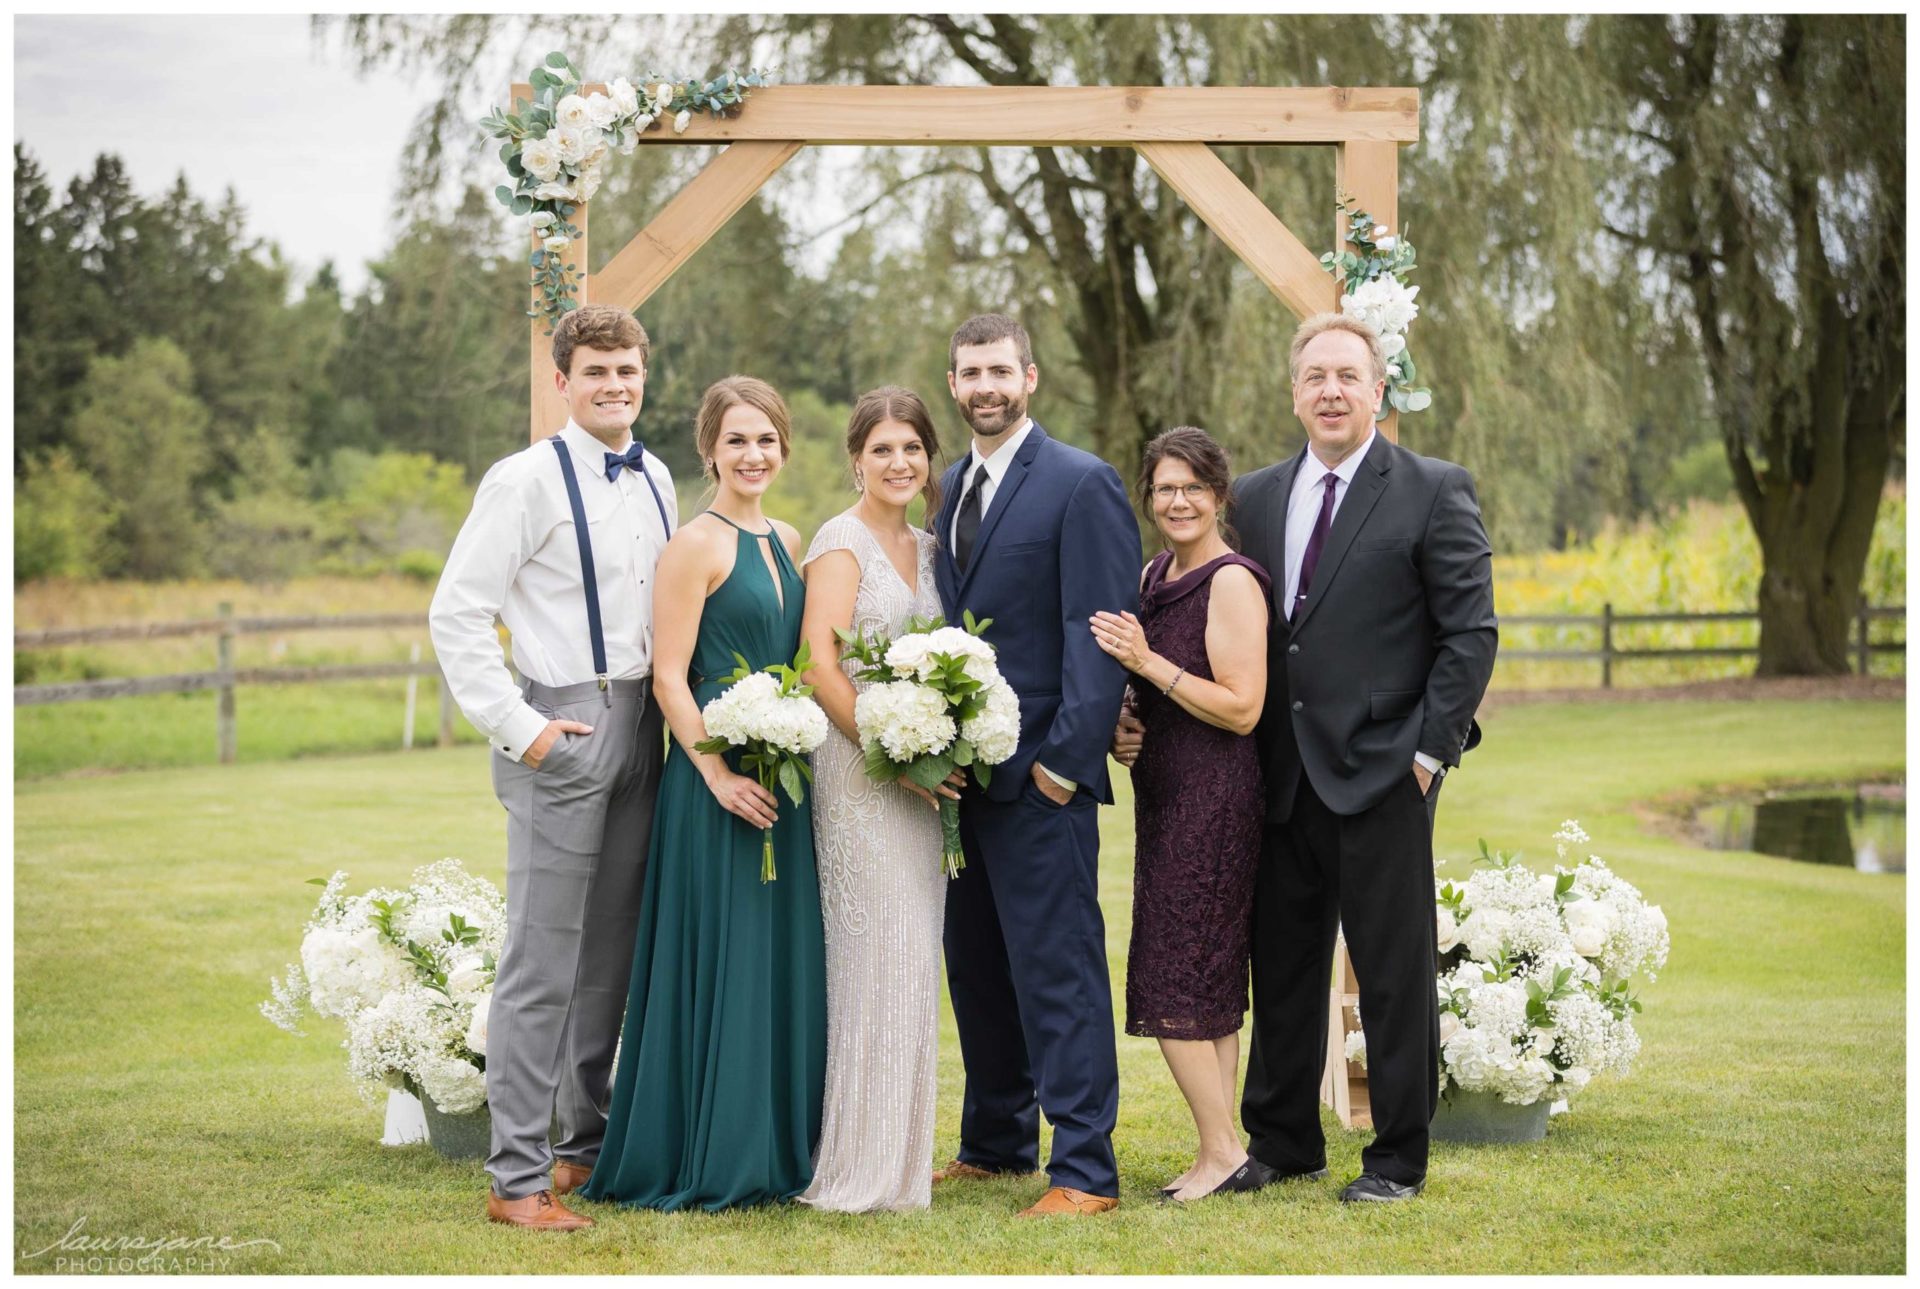 Stunning Family Portraits at Wisconsin Wedding